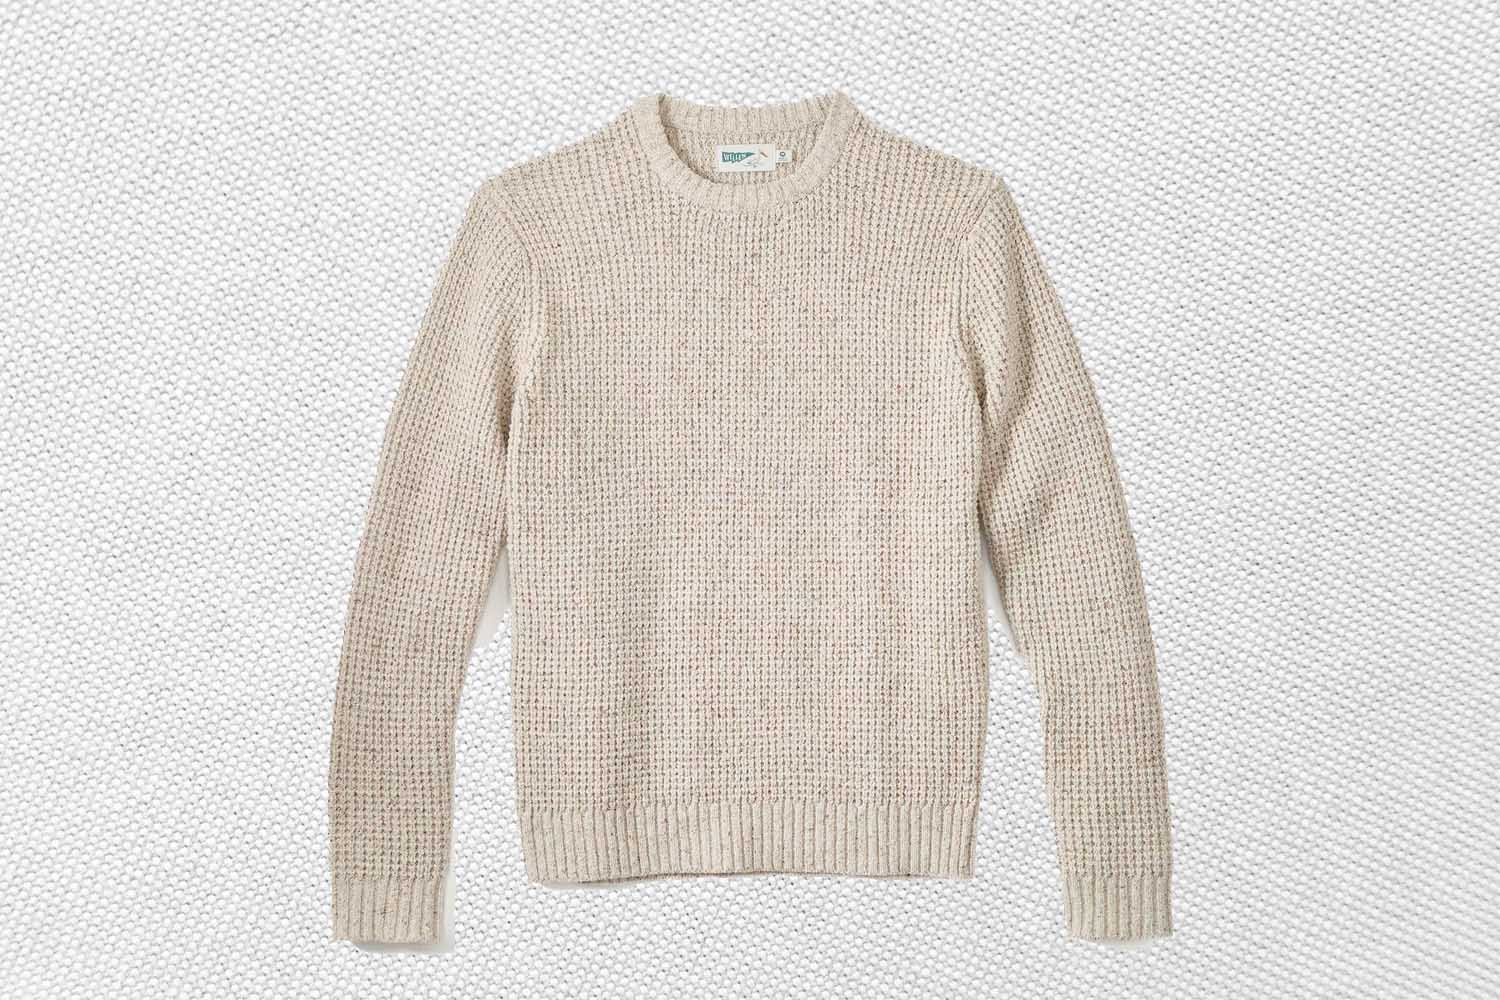 Wellen Recycled Cotton Headlands Sweater, one of the best women's gifts to give this September